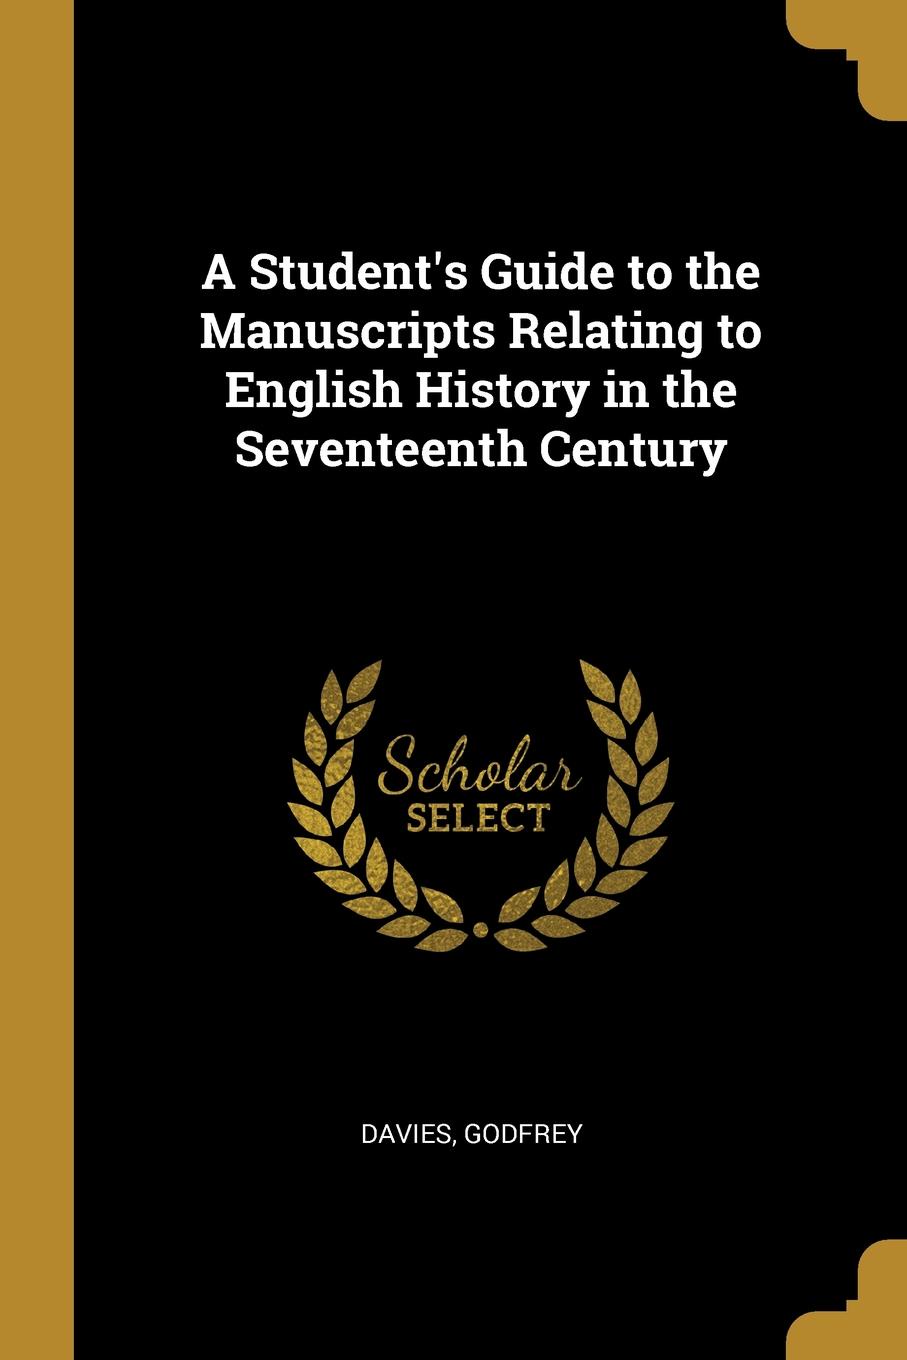 A Student.s Guide to the Manuscripts Relating to English History in the Seventeenth Century